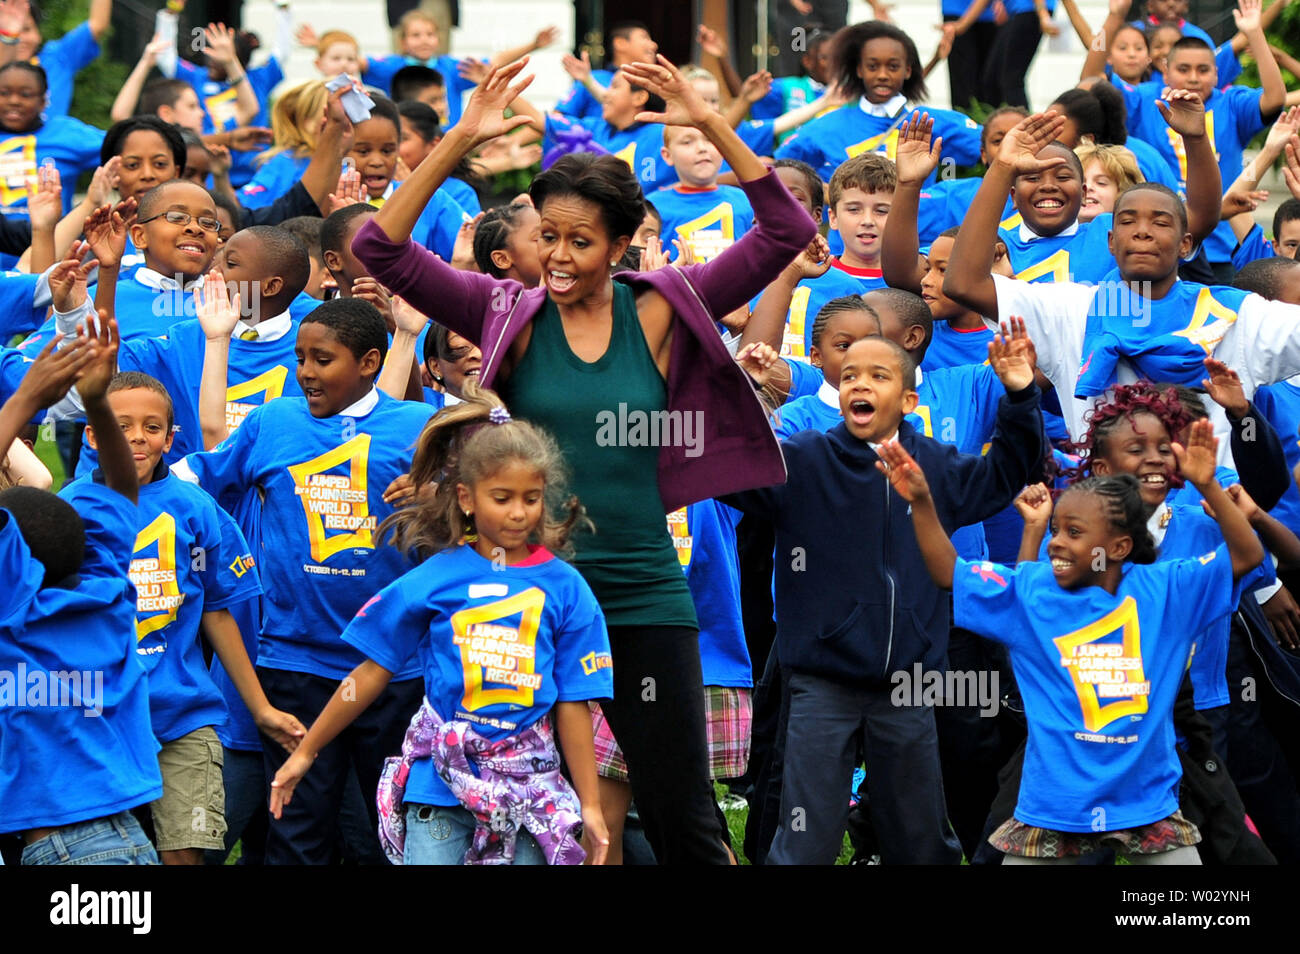 First Lady Michelle Obama and local area school children attempt to break the Guinness World Record title for the most people doing jumping jacks in a 24-hour period, at the White House in Washington on October 11, 2011.  UPI/Kevin Dietsch Stock Photo